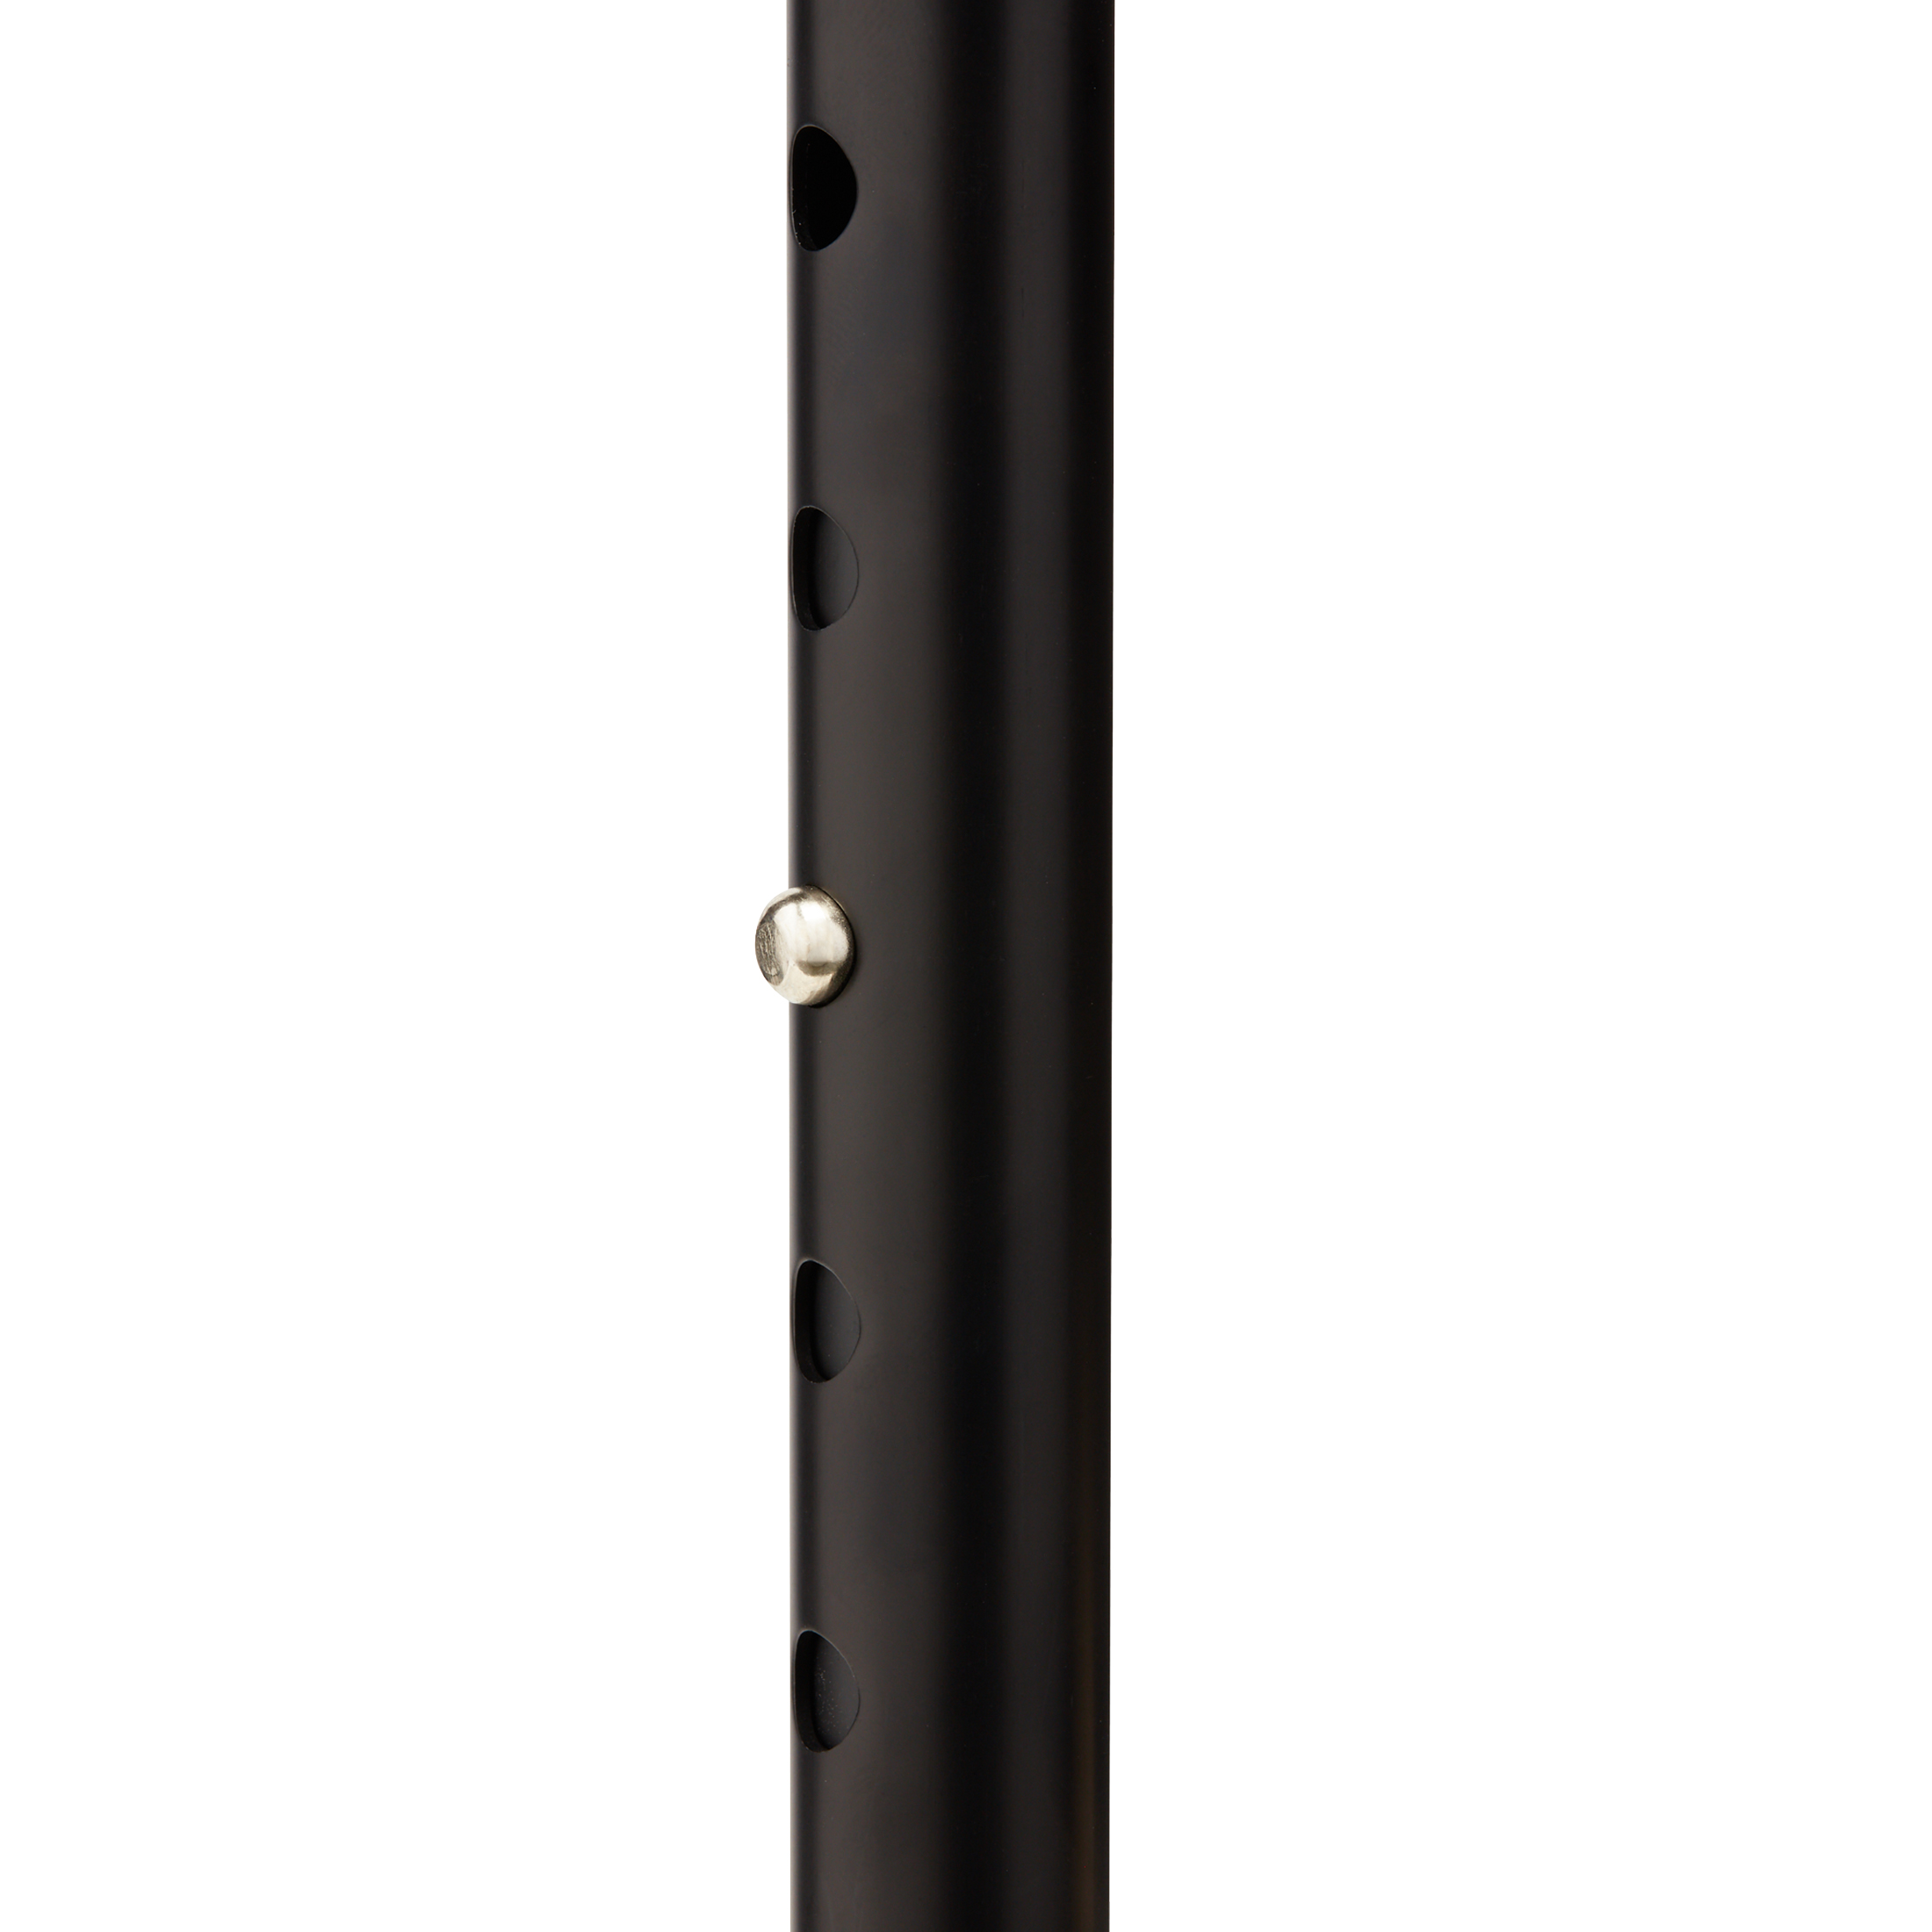 Equate Comfort Grip Walking Cane for All Occasions, Adjustable, Wrist Strap, Black, 300 lb Capacity - image 7 of 8